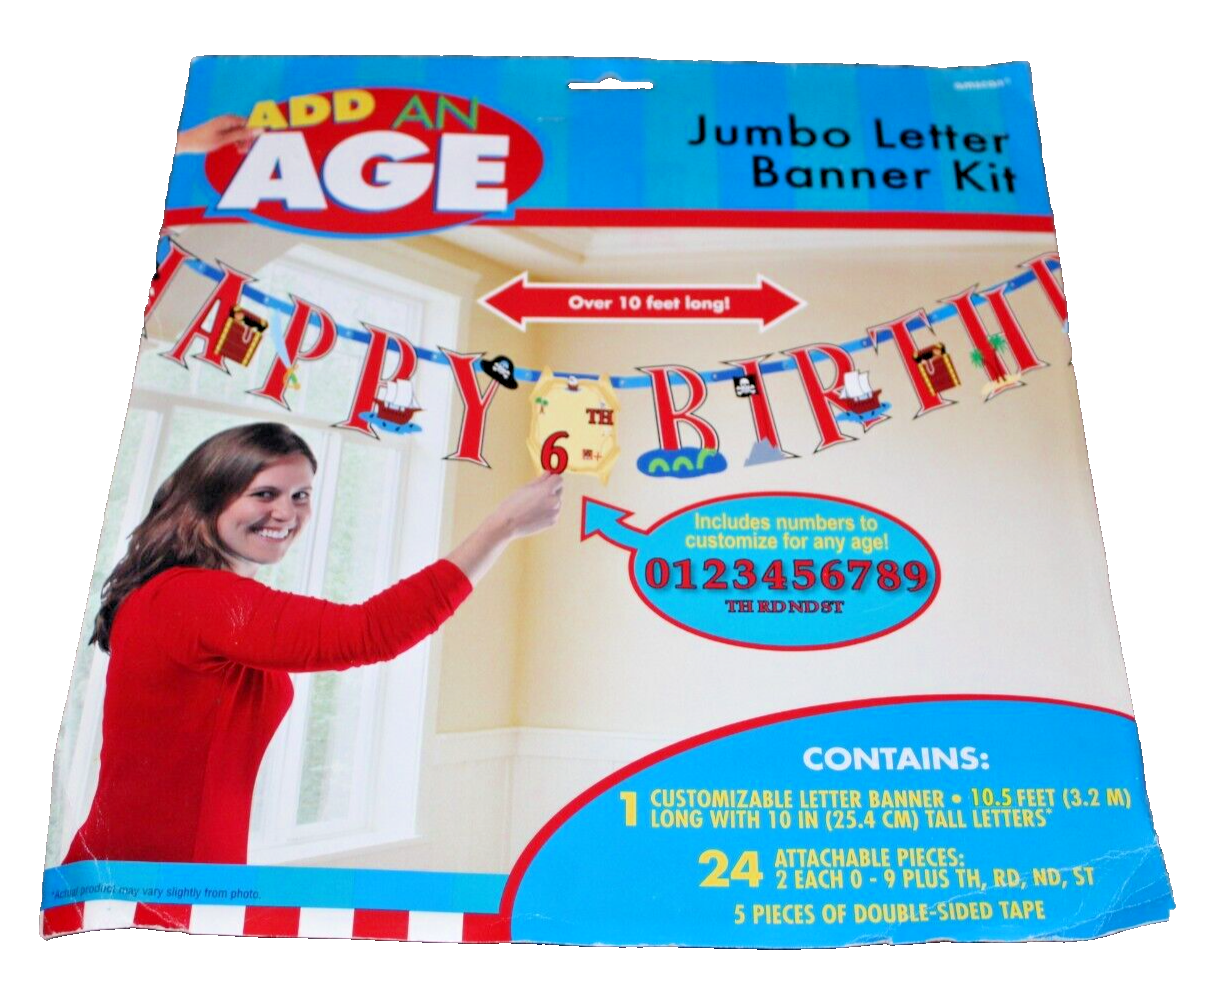 Pirate Add An Age Jumbo Letter Banner Kit Happy Birthday Party Decoration 10ft - $9.61